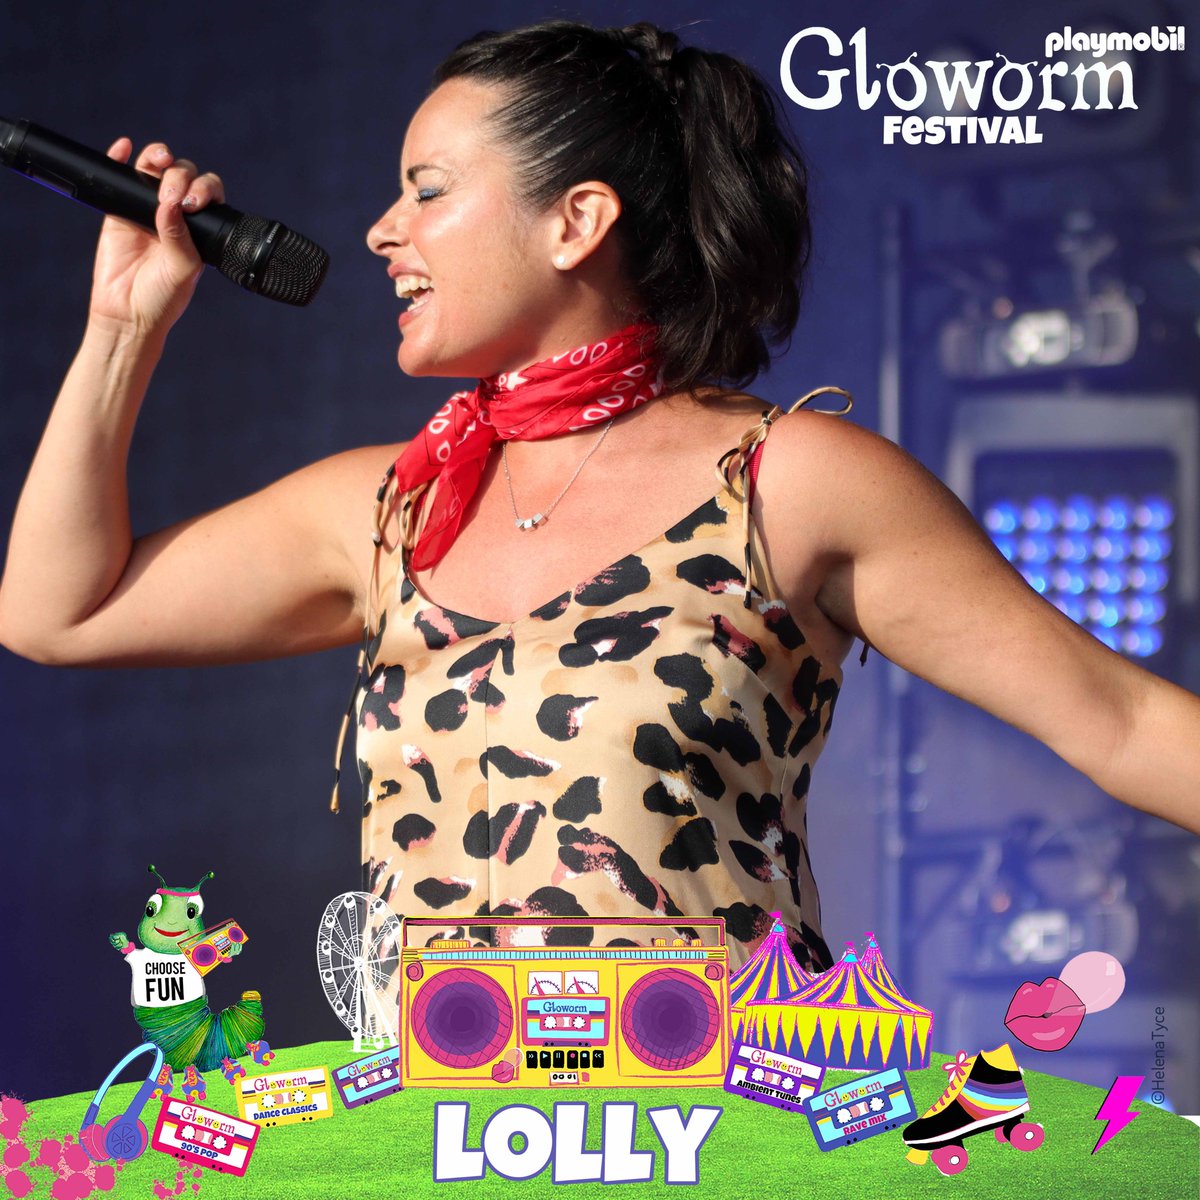 Who saw that Lolly was announced on our previous post? 👀 Incase you missed it, Lolly will be performing her iconic 90's hits live on the main stage on Sunday 18th August! 🤩🎉💃 #Lolly #heymickey #VivaLaRadio